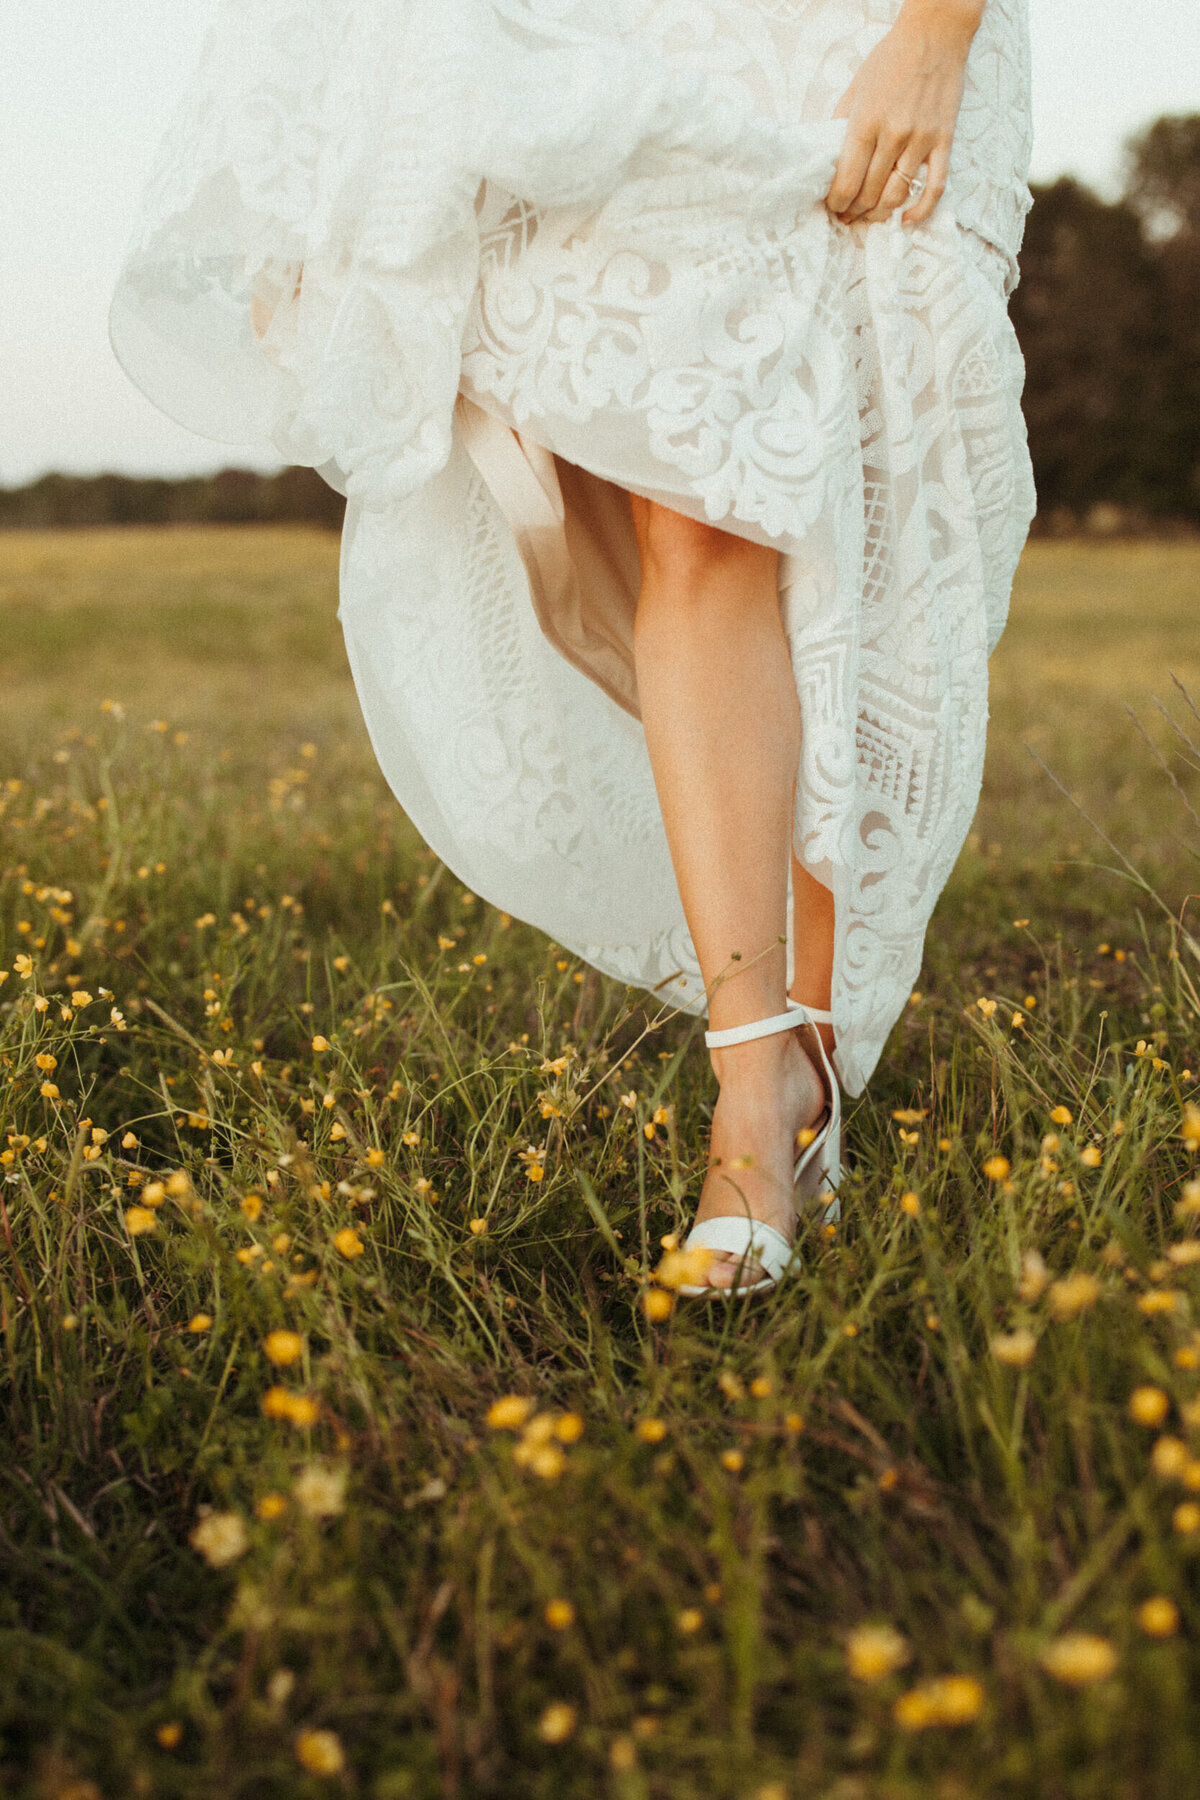 Bride holding up her wedding dress showing off her shoes as she walks through a field of wildflowers